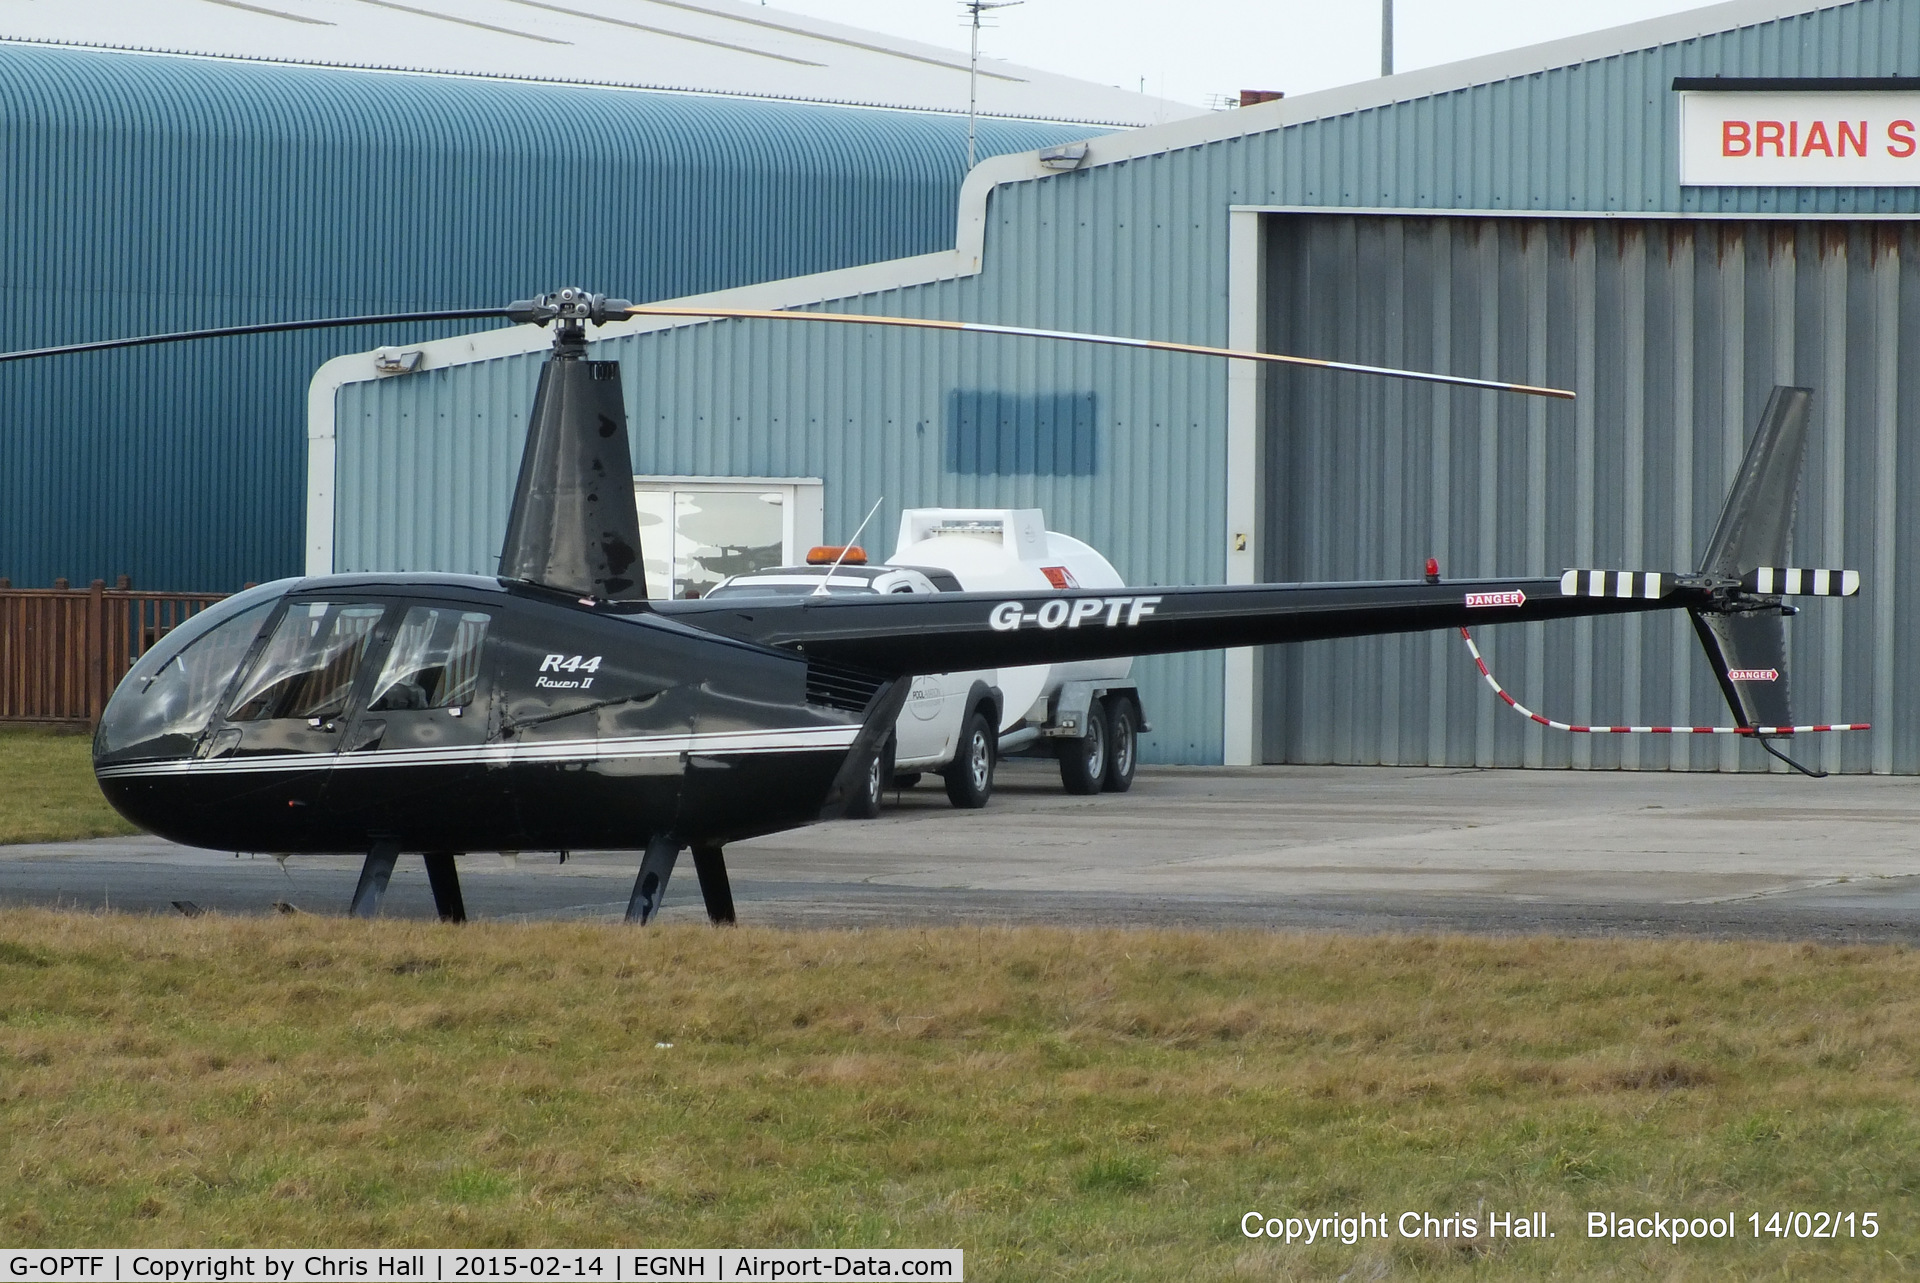 G-OPTF, 2003 Robinson R44 Raven II C/N 10235, privately owned